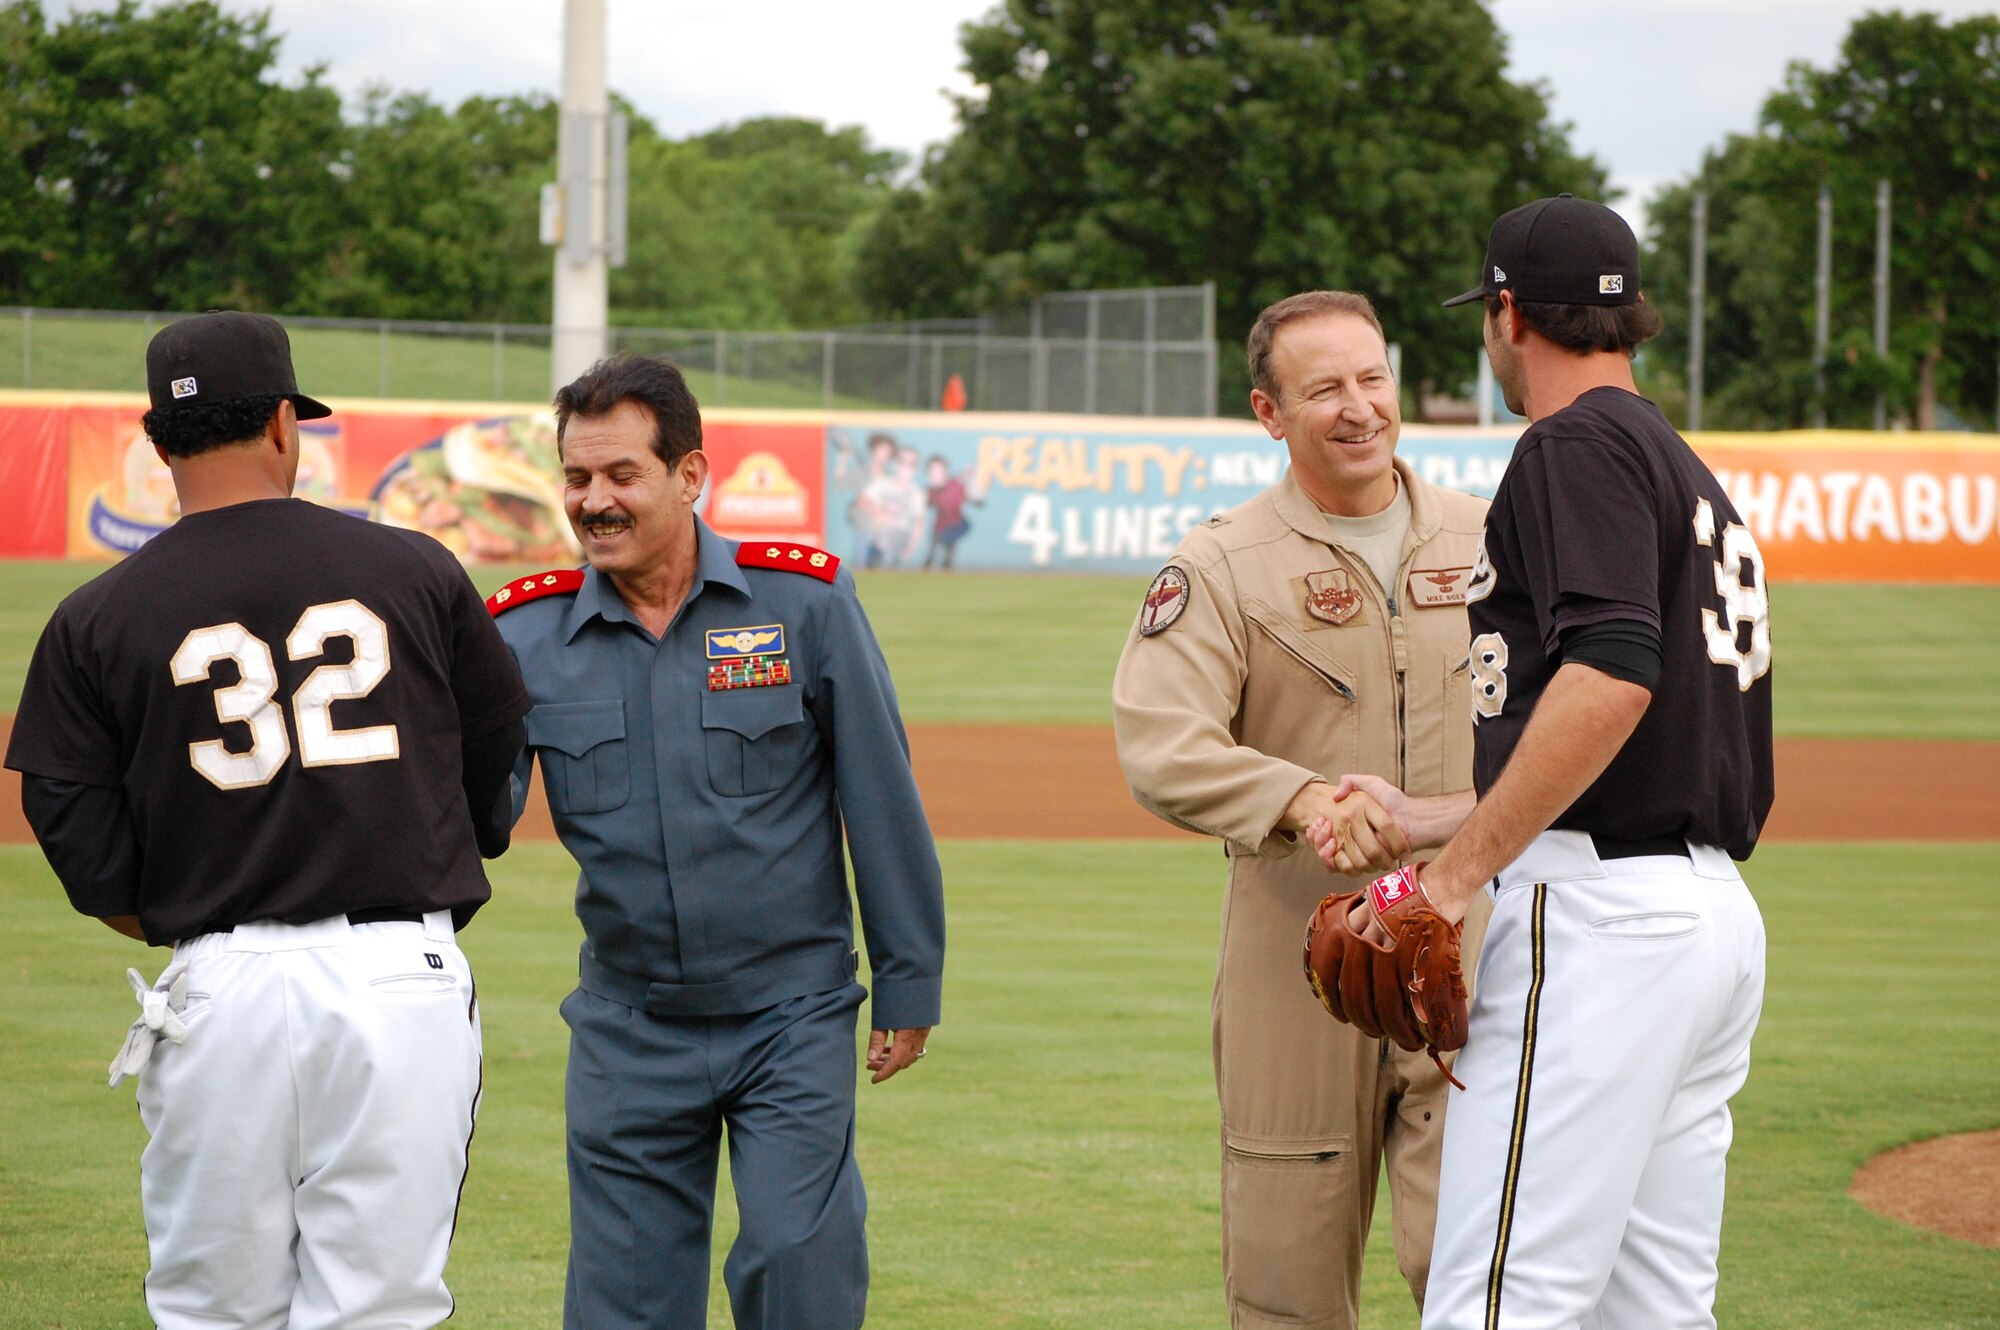 Maj. Gen. Mohammad Dawran, Afghan National army air corps, center, and Brig. Gen. Michael Boera, Coalition Air Power Transition Force commanding general, center,  shake hands with Missions 2nd Baseman, Jorge Minyeti, far left, and pitcher Craig Italino, after they threw out the dual-first pitch of the game at Wolf Stadium May 23 in San Antonio, Texas. General Dawran is visiting Air Education and Training Command to receive updated information on current and future security assistance and cooperation training for the ANAAC. General Boera is working to stand up a robust ANAAC center of excellence and he is exploring more in-depth maintenance training between the two nations. Since the establishment of the Kabul Air Corps Training Center in 2007, in Afghanistan, more than 1,100 Afghani military members have received training in air corps orientation, air traffic control, fire fighting, aircraft maintenance, loadmaster duties and gunner training. (U.S. Air Force photo/Master Sgt. Paul Kilgallon)